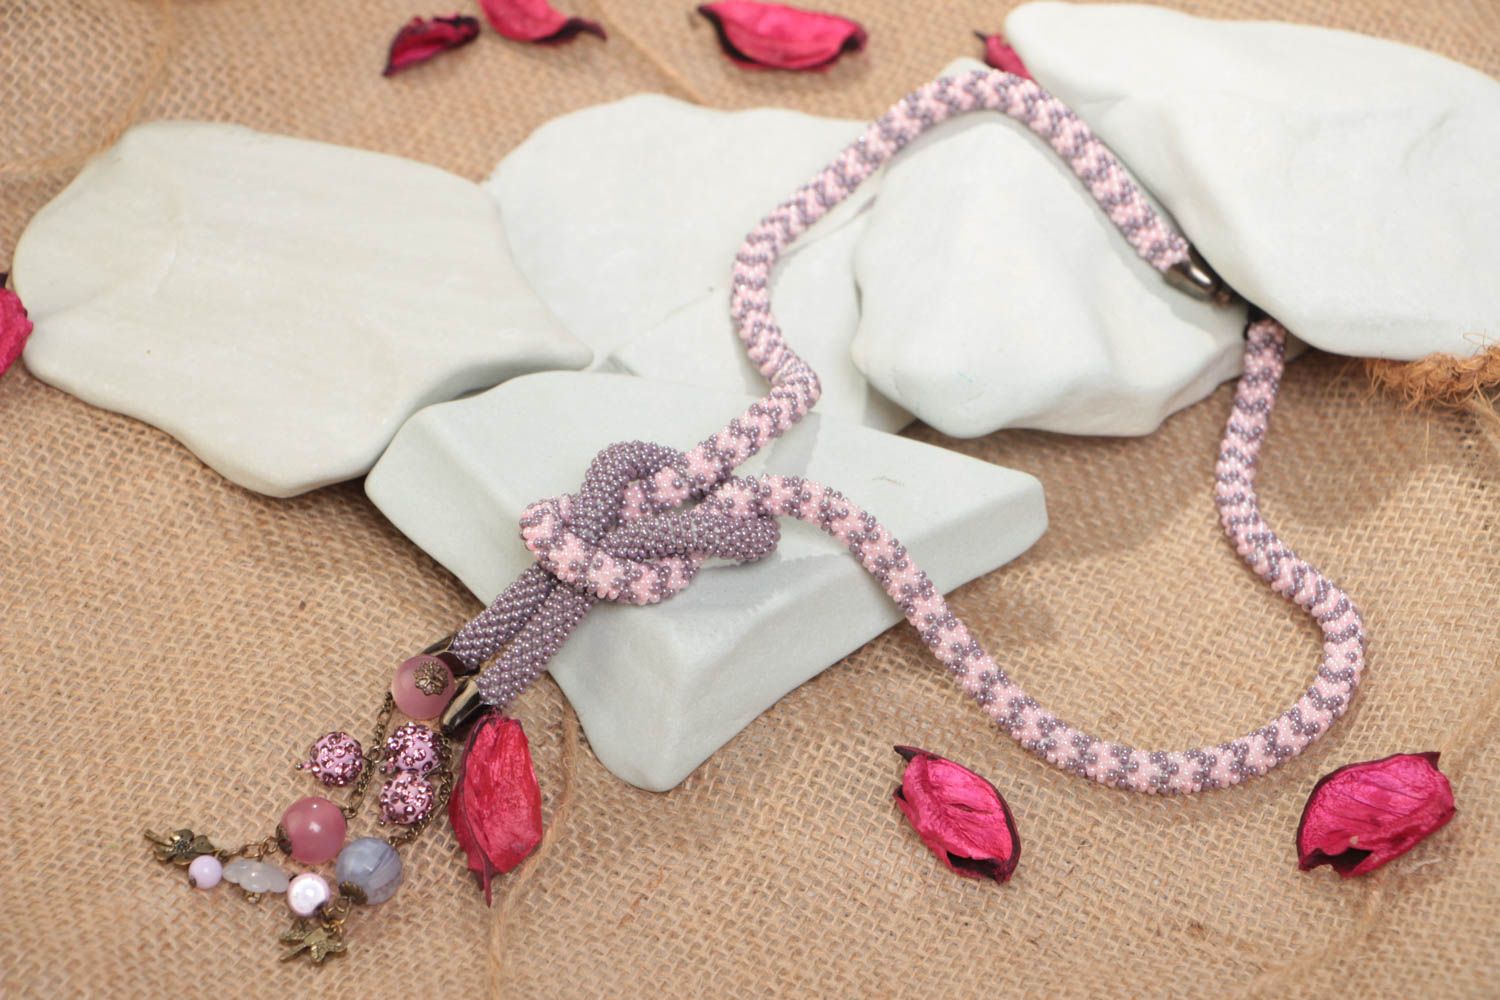 Handmade designer gray and pink beaded cord necklace with charms for women photo 1